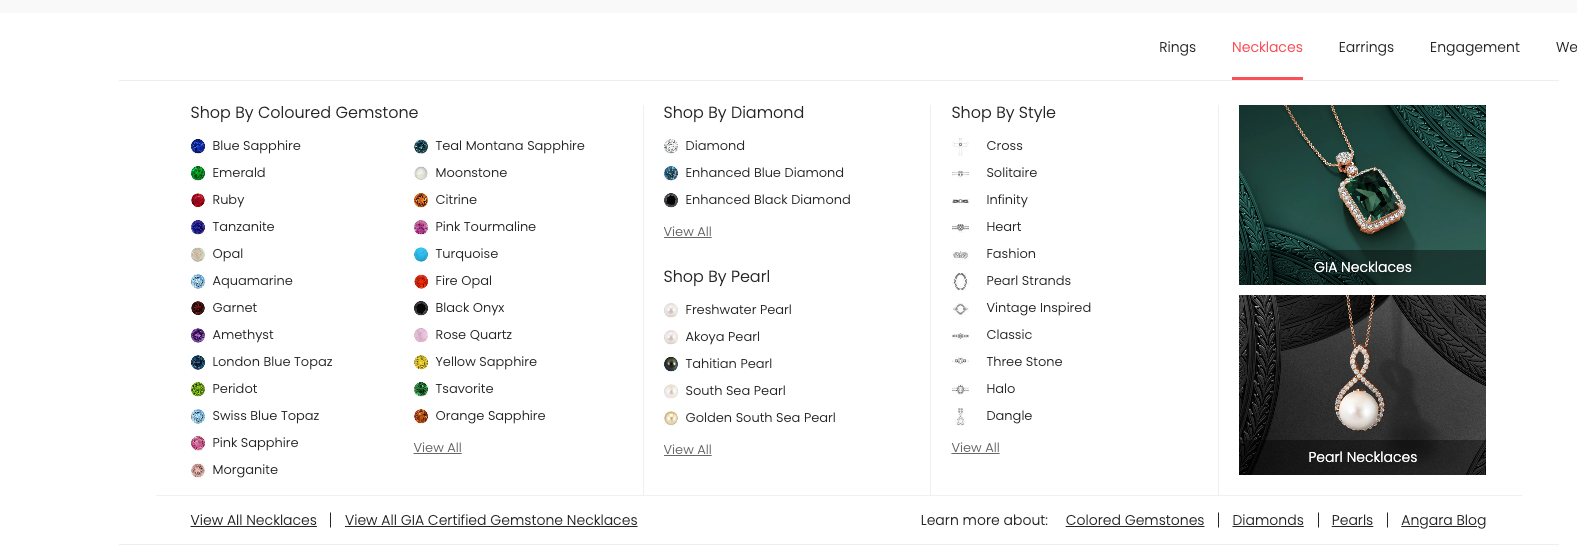 Example of a Mega Menu with images next to each link describing a type of jewelry stone